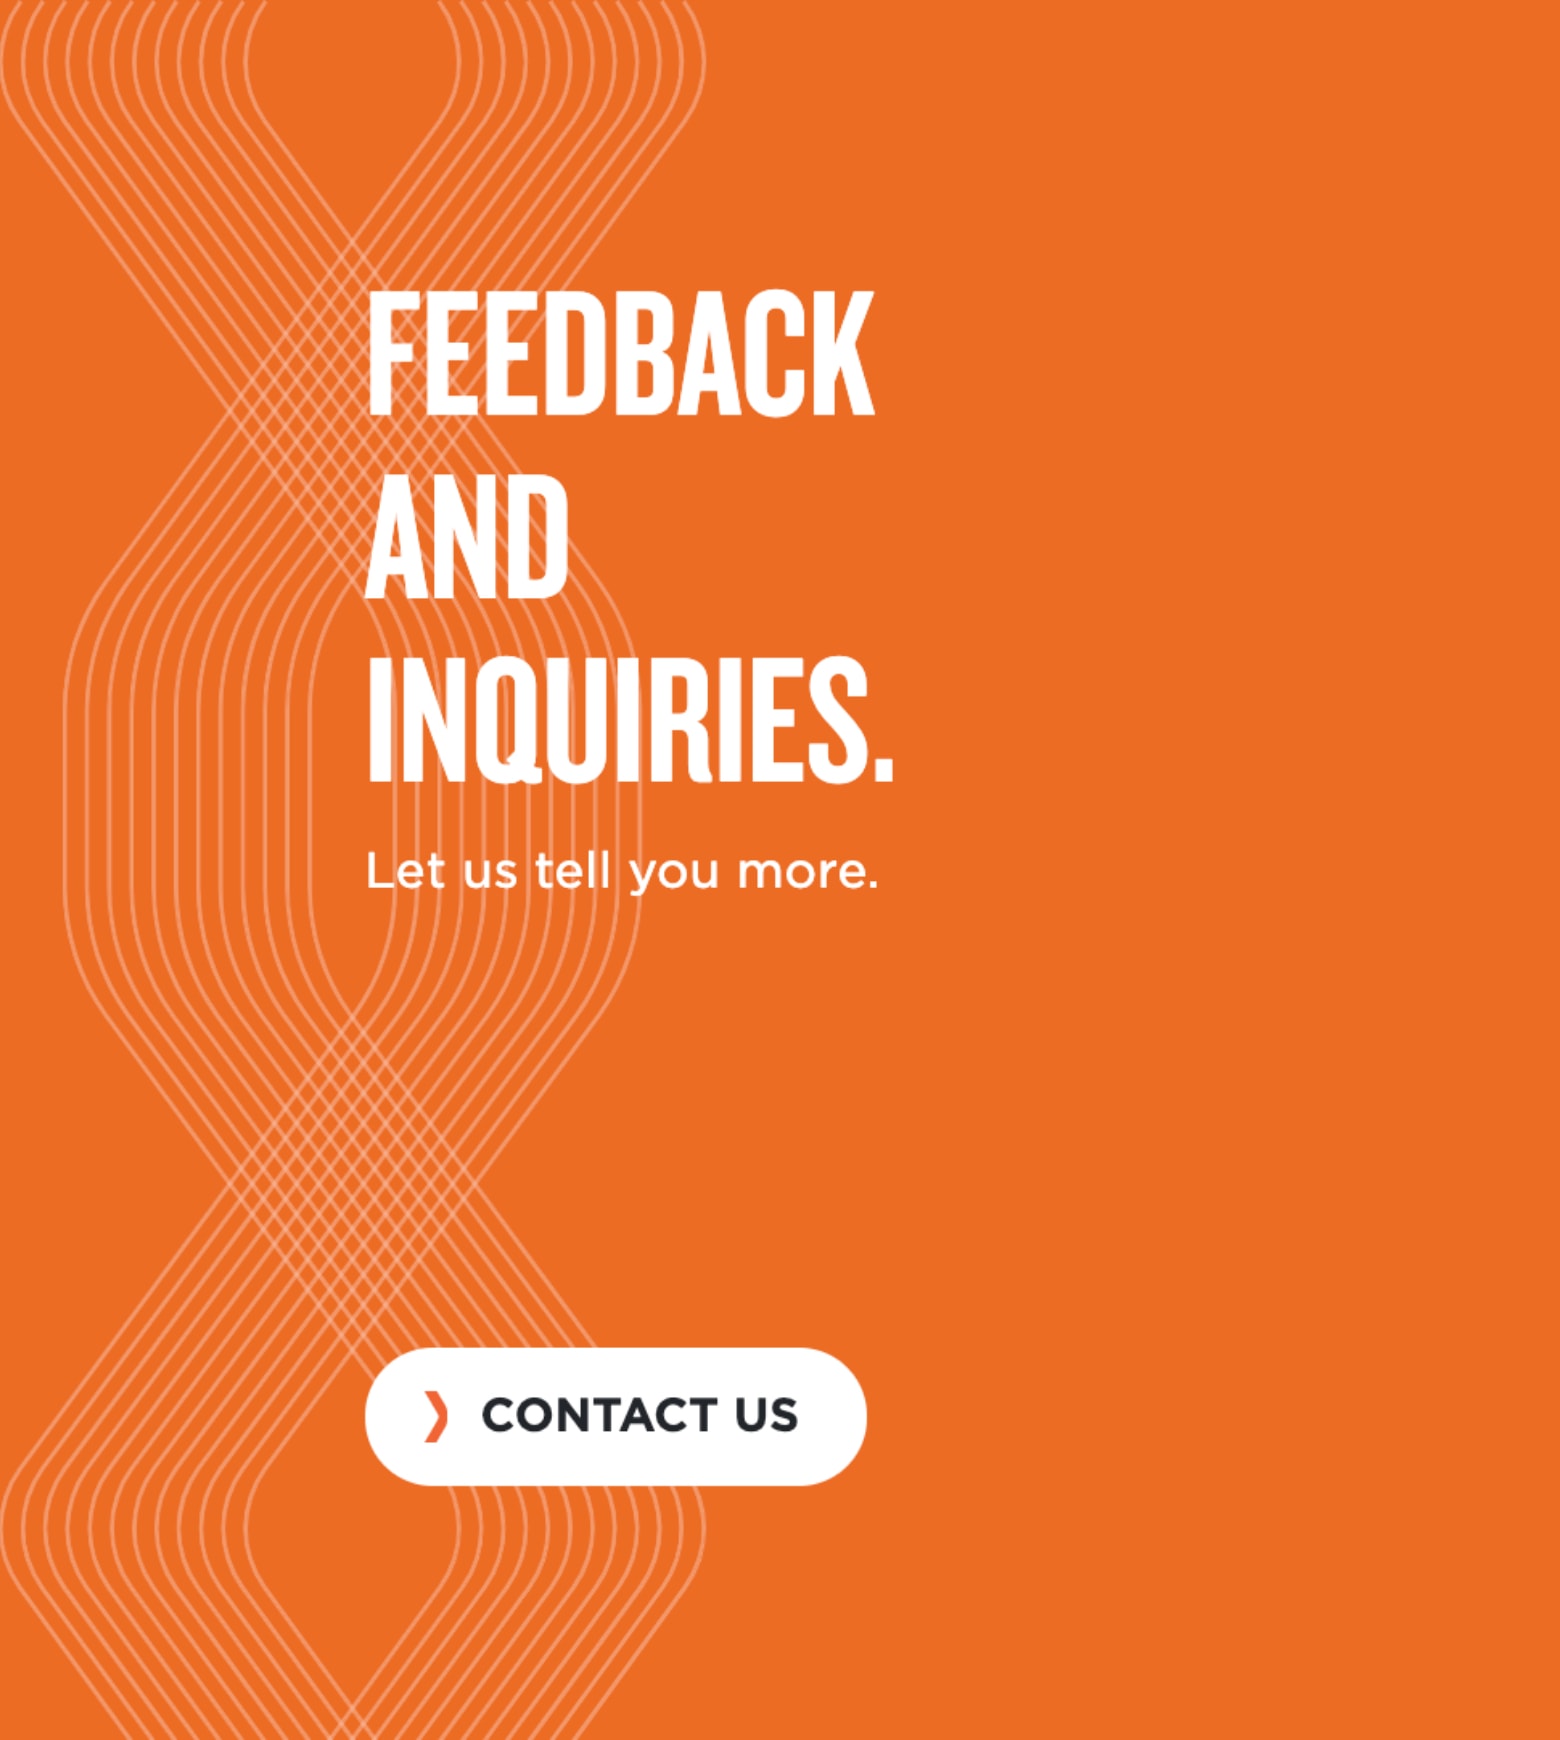 Feedback and inquiries graphic, white text on orange background